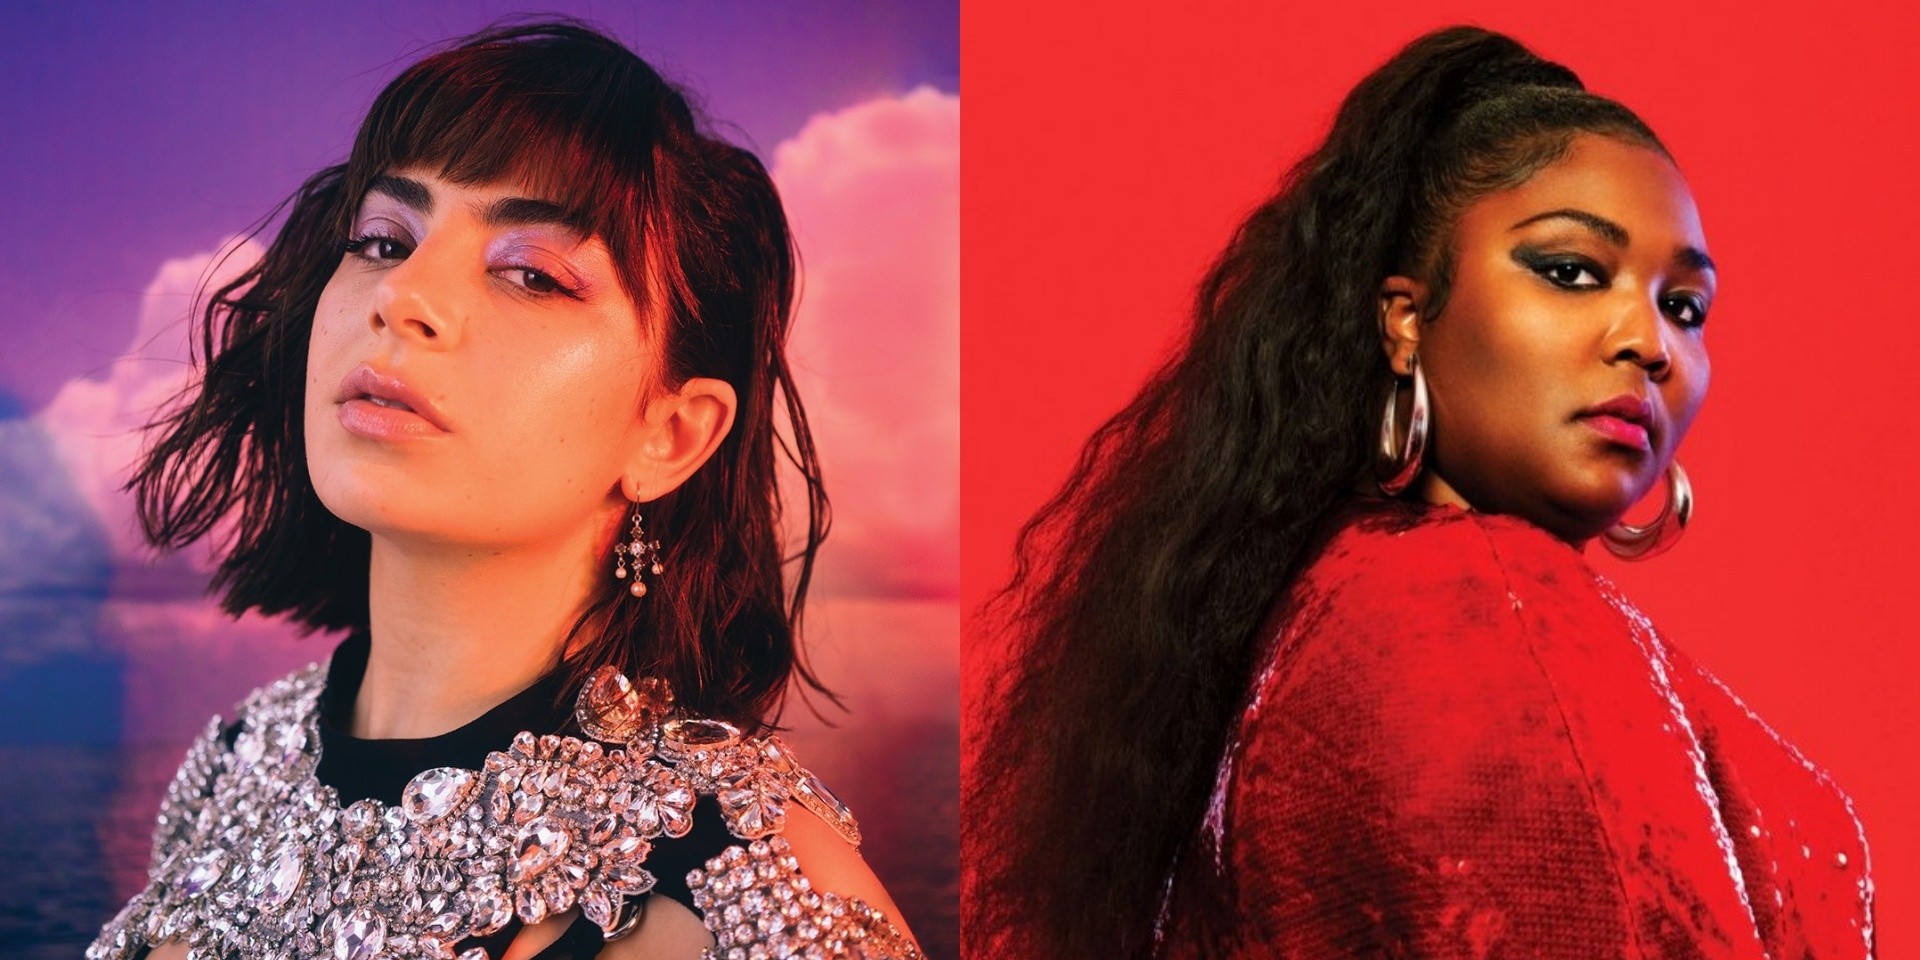 Charli XCX and Lizzo release electrifying new single 'Blame It On Your Love' – listen